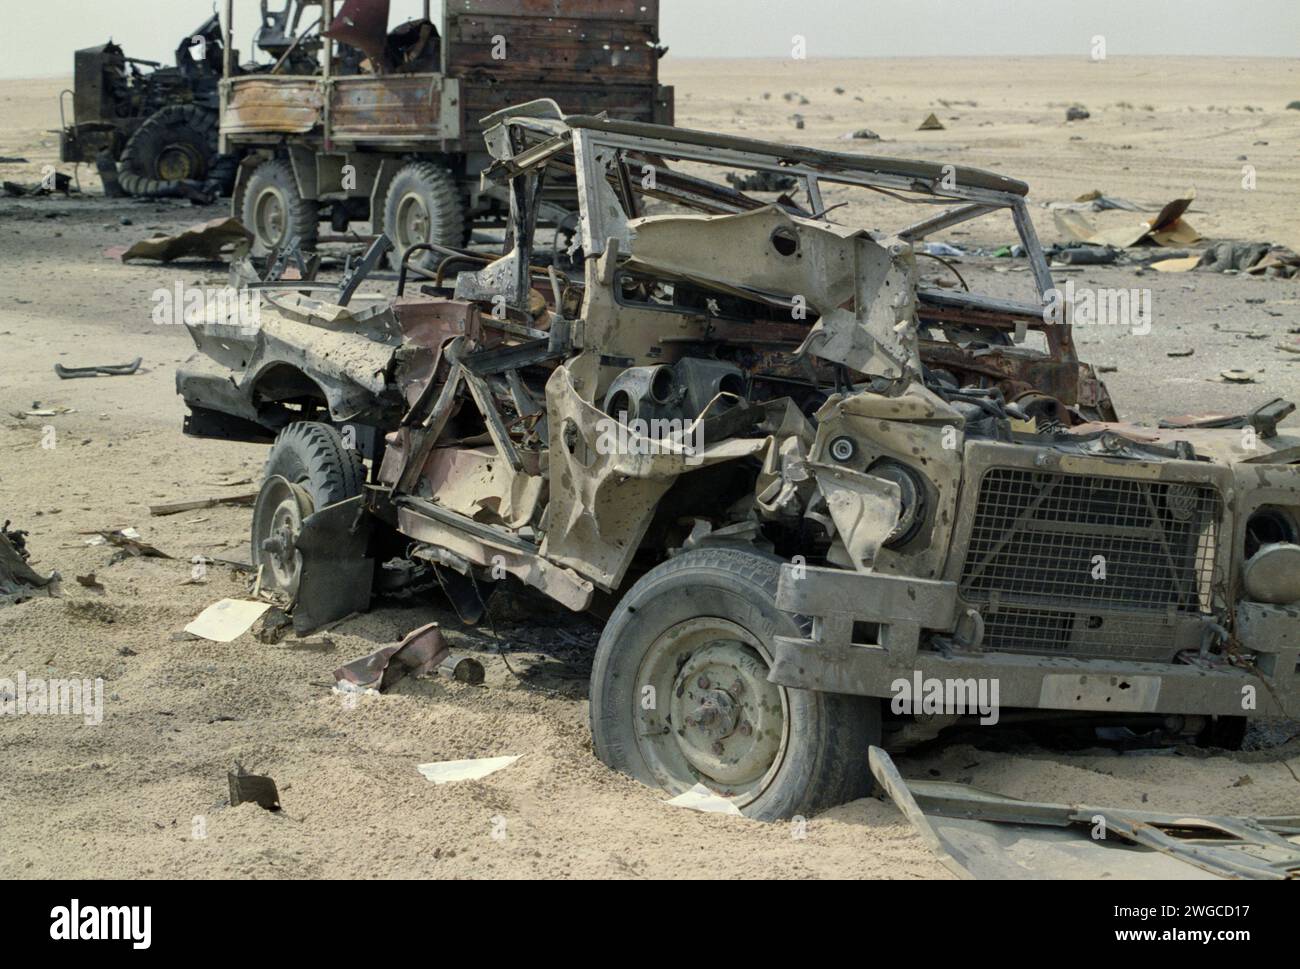 5th March 1991 Part of an Iraqi convoy of about two dozen military vehicles that were attacked with cluster bombs by the USAF a week before, north of Kuwait City. Stock Photo